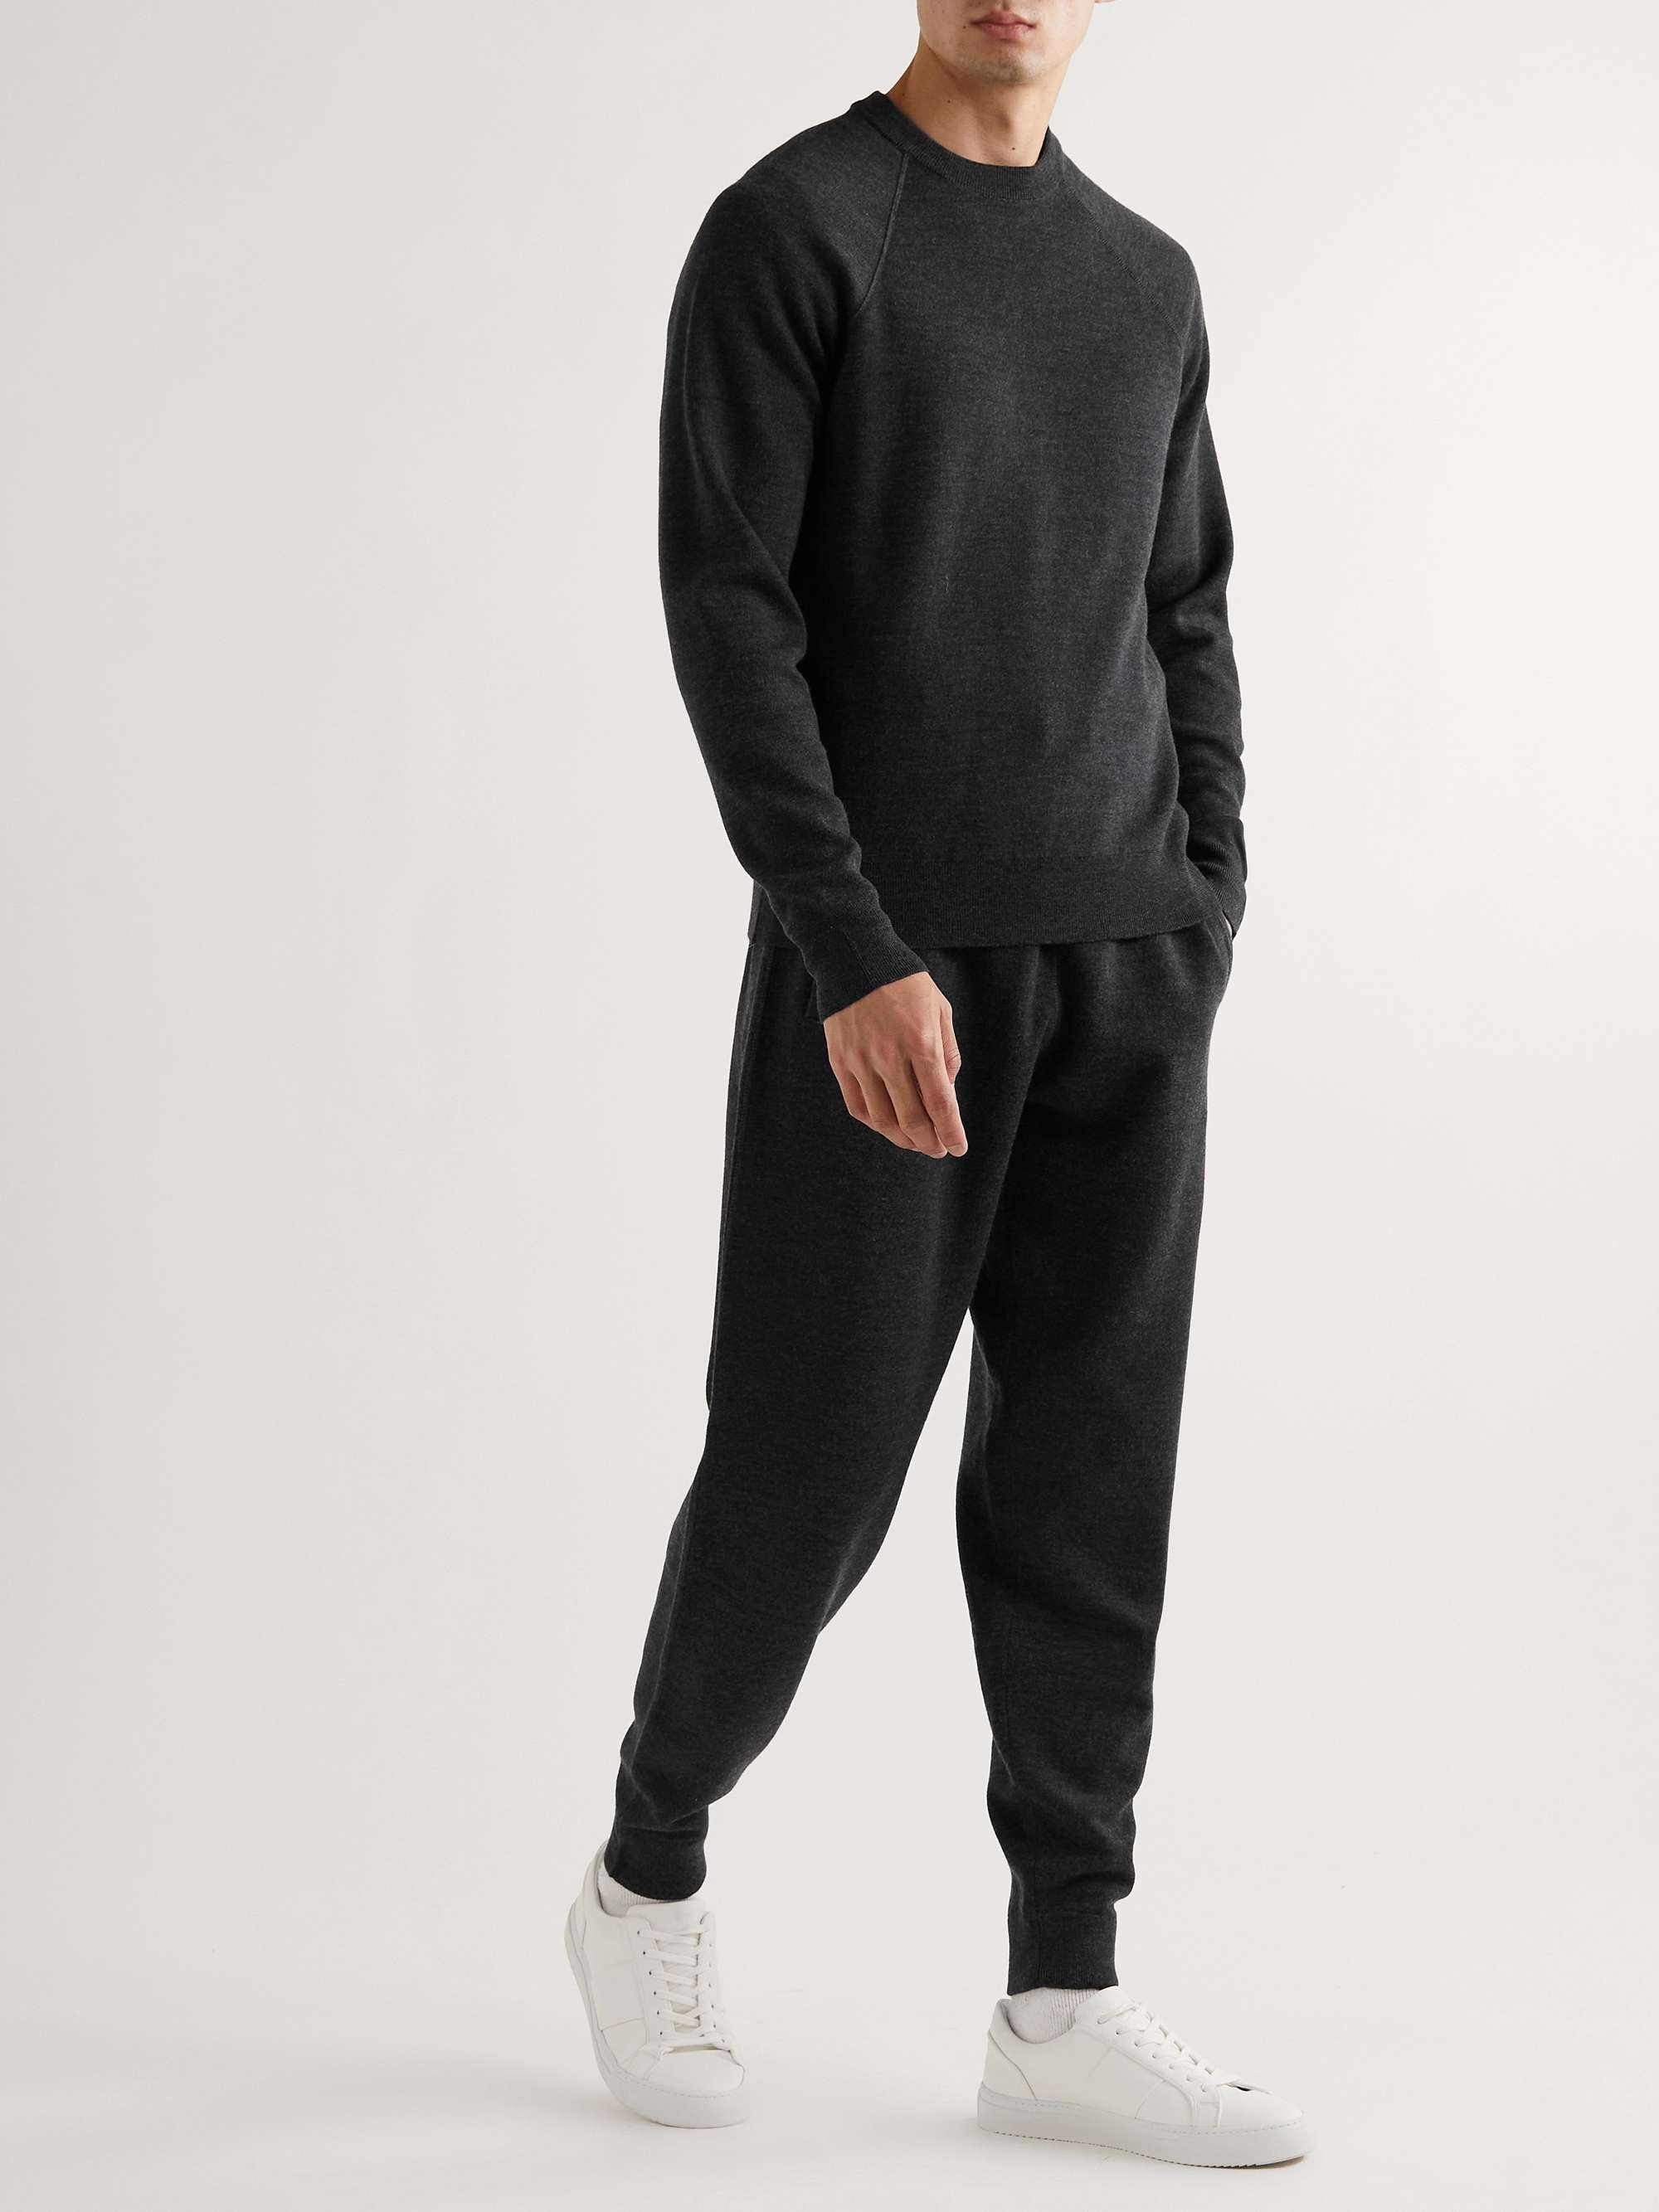 MR P. Double-Faced Merino Wool-Blend Sweater